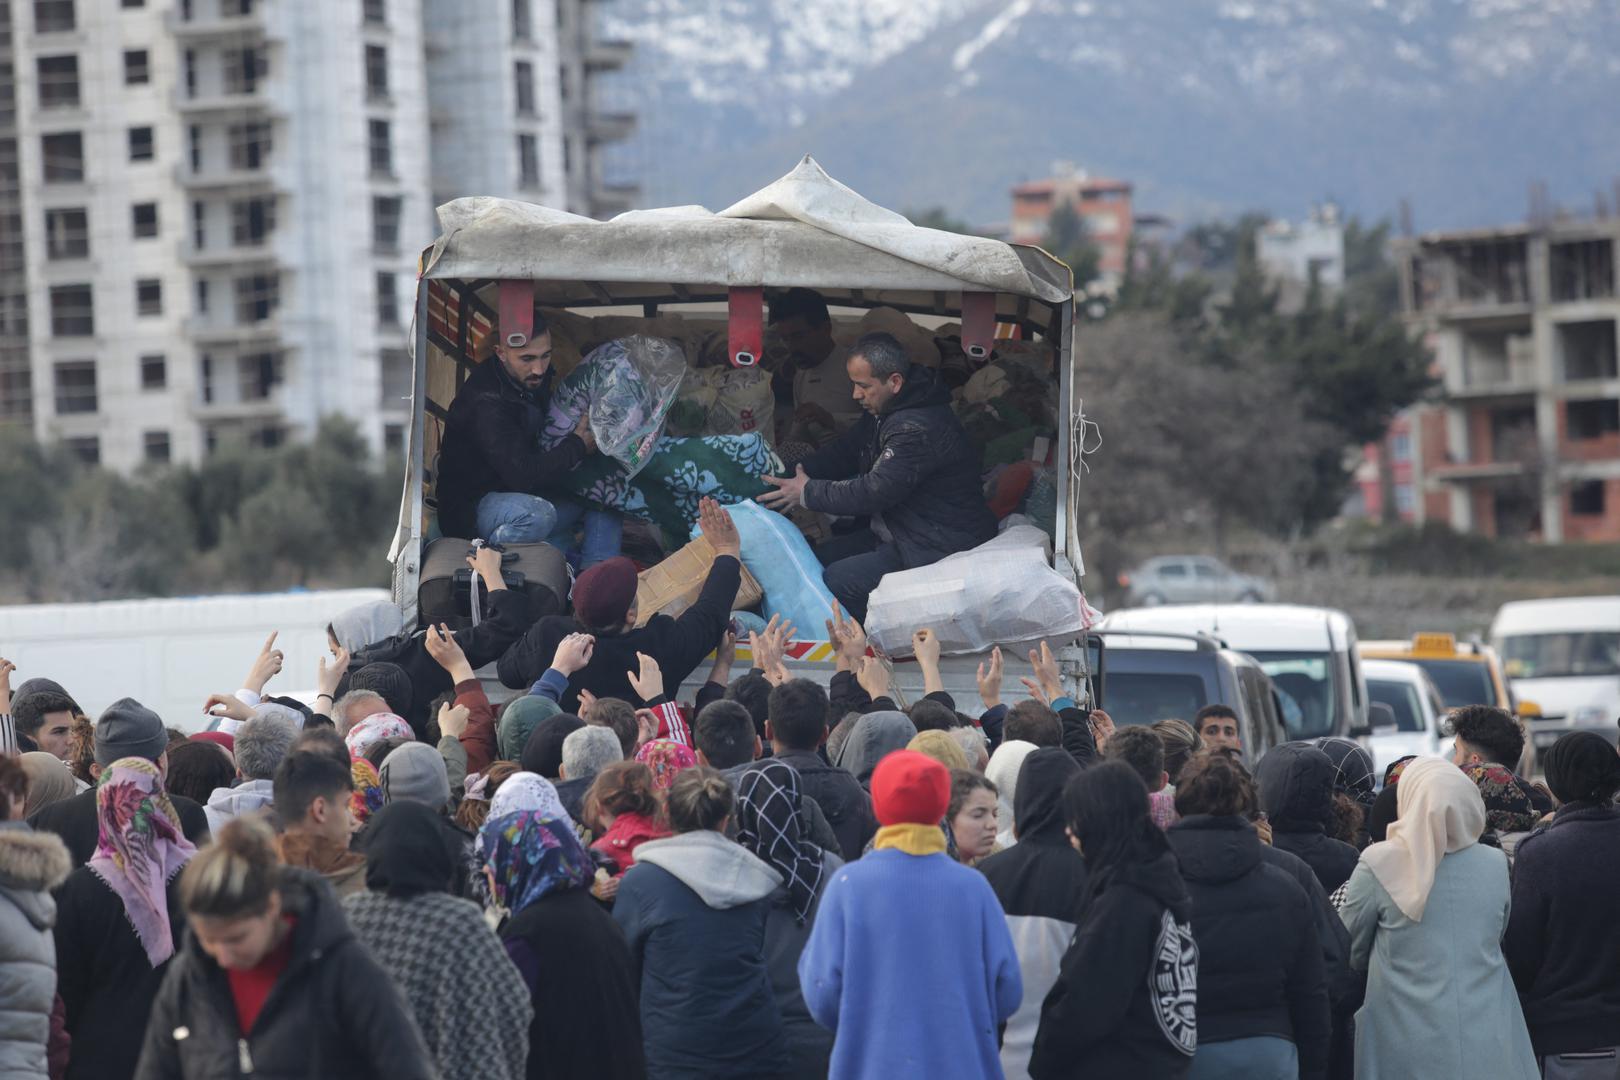 Victims of the earthquake take food delivered by the rescue teams in Hatay, Turkey, February 7, 2023. A powerful earthquake has hit a wide area in south-eastern Turkey, near the Syrian border, killing more than 7000 people and trapping many others. Photo by Serdar Ozsoy/Depo Photos/ABACAPRESS.COM Photo: Depo Photos/ABACA/ABACA